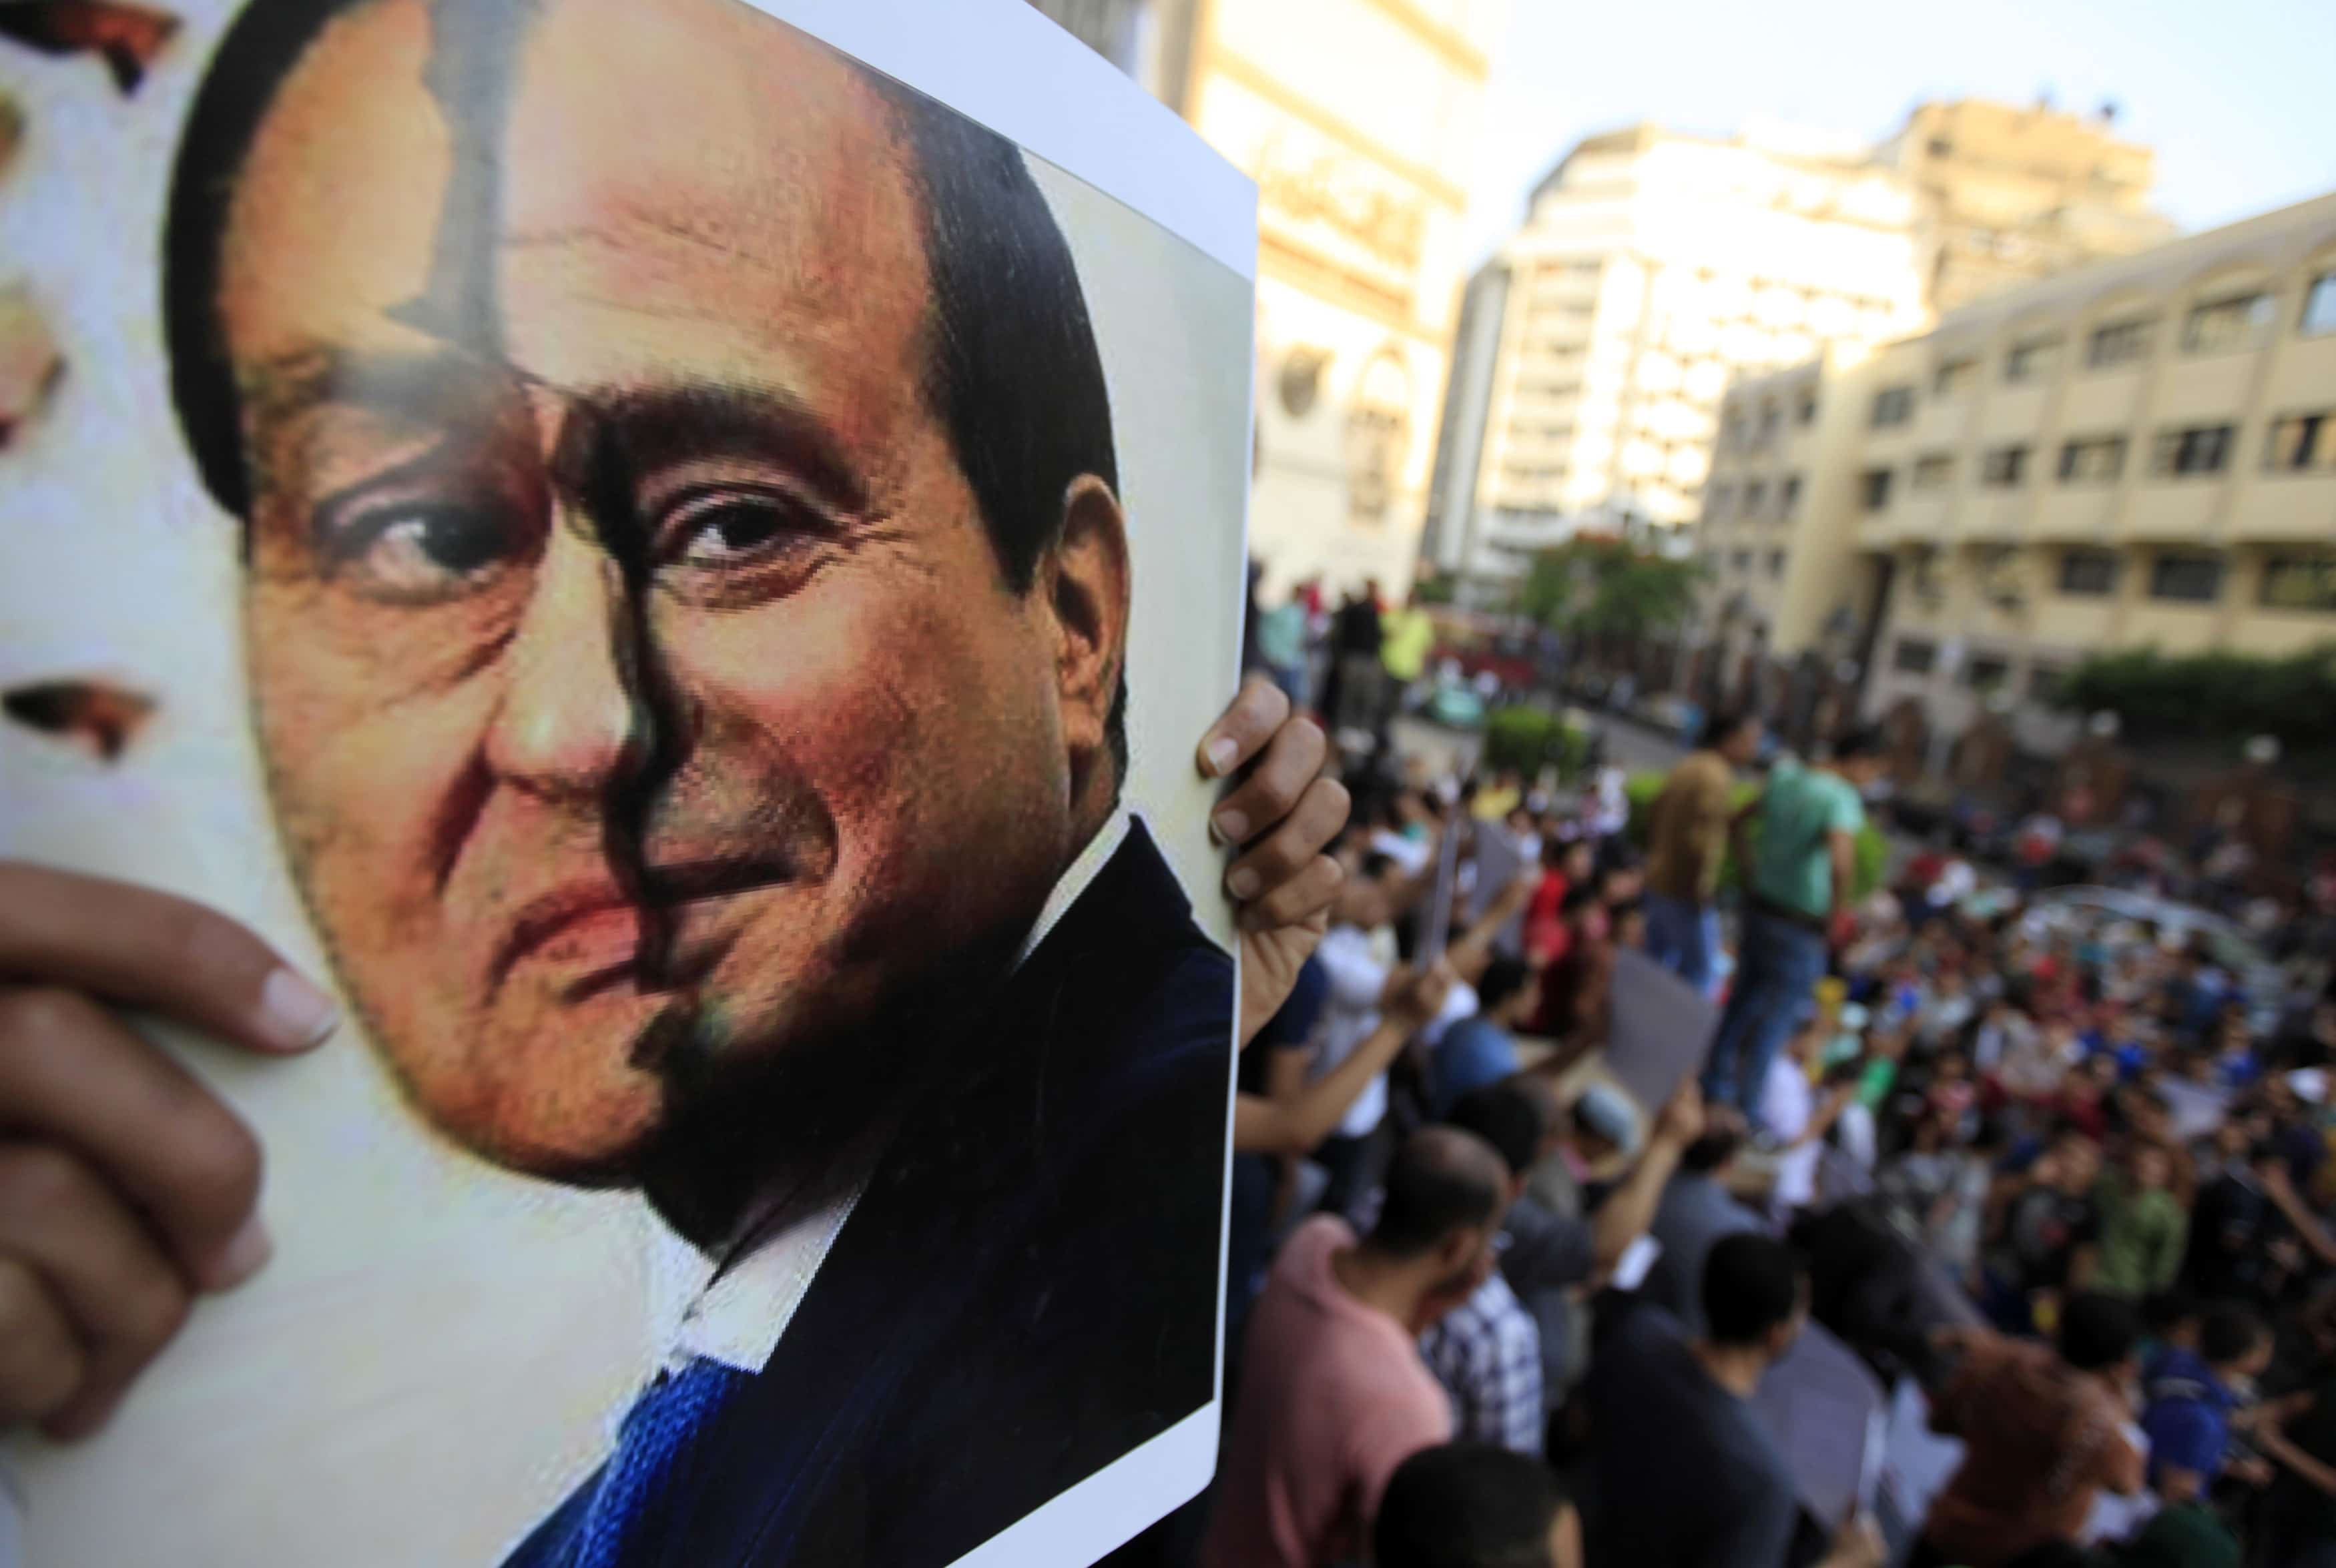 A poster show a placard with the faces of Egypt's ousted President Hosni Mubarak (L) and President Abdelfattah el-Sisi, REUTERS/Amr Abdallah Dalsh